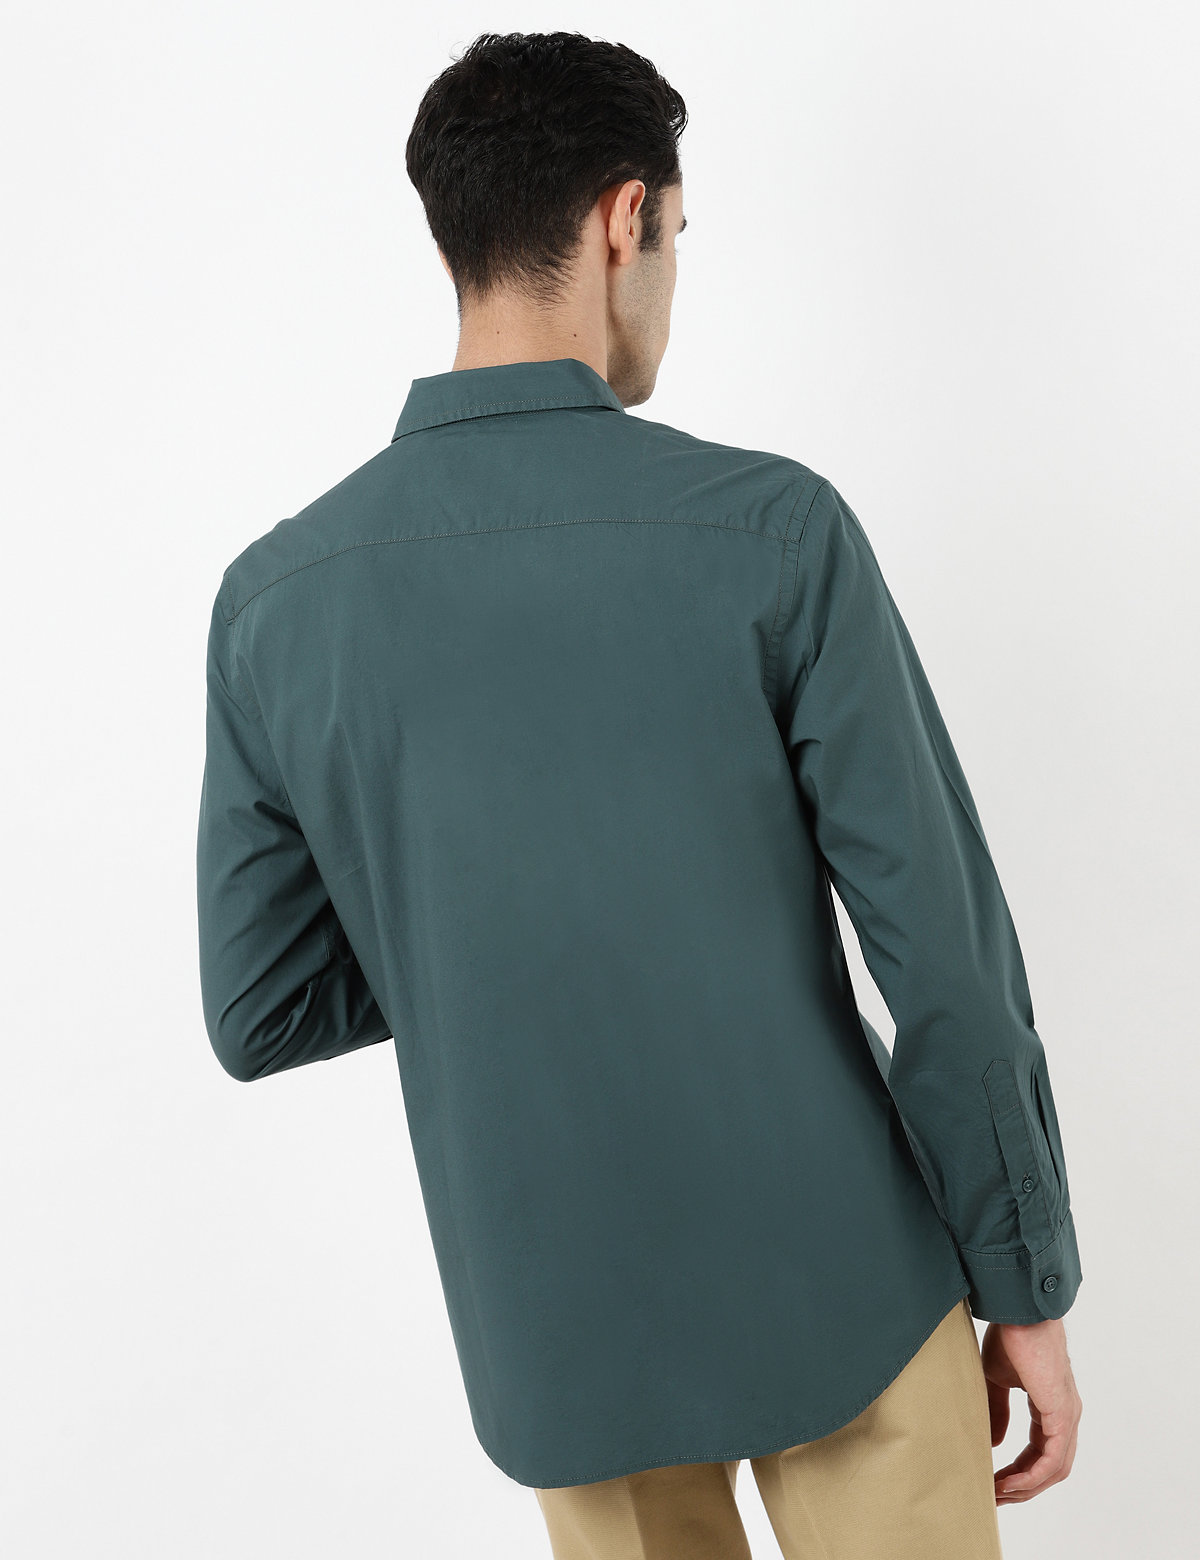 Pure Cotton Soft Touch Solid Shirt